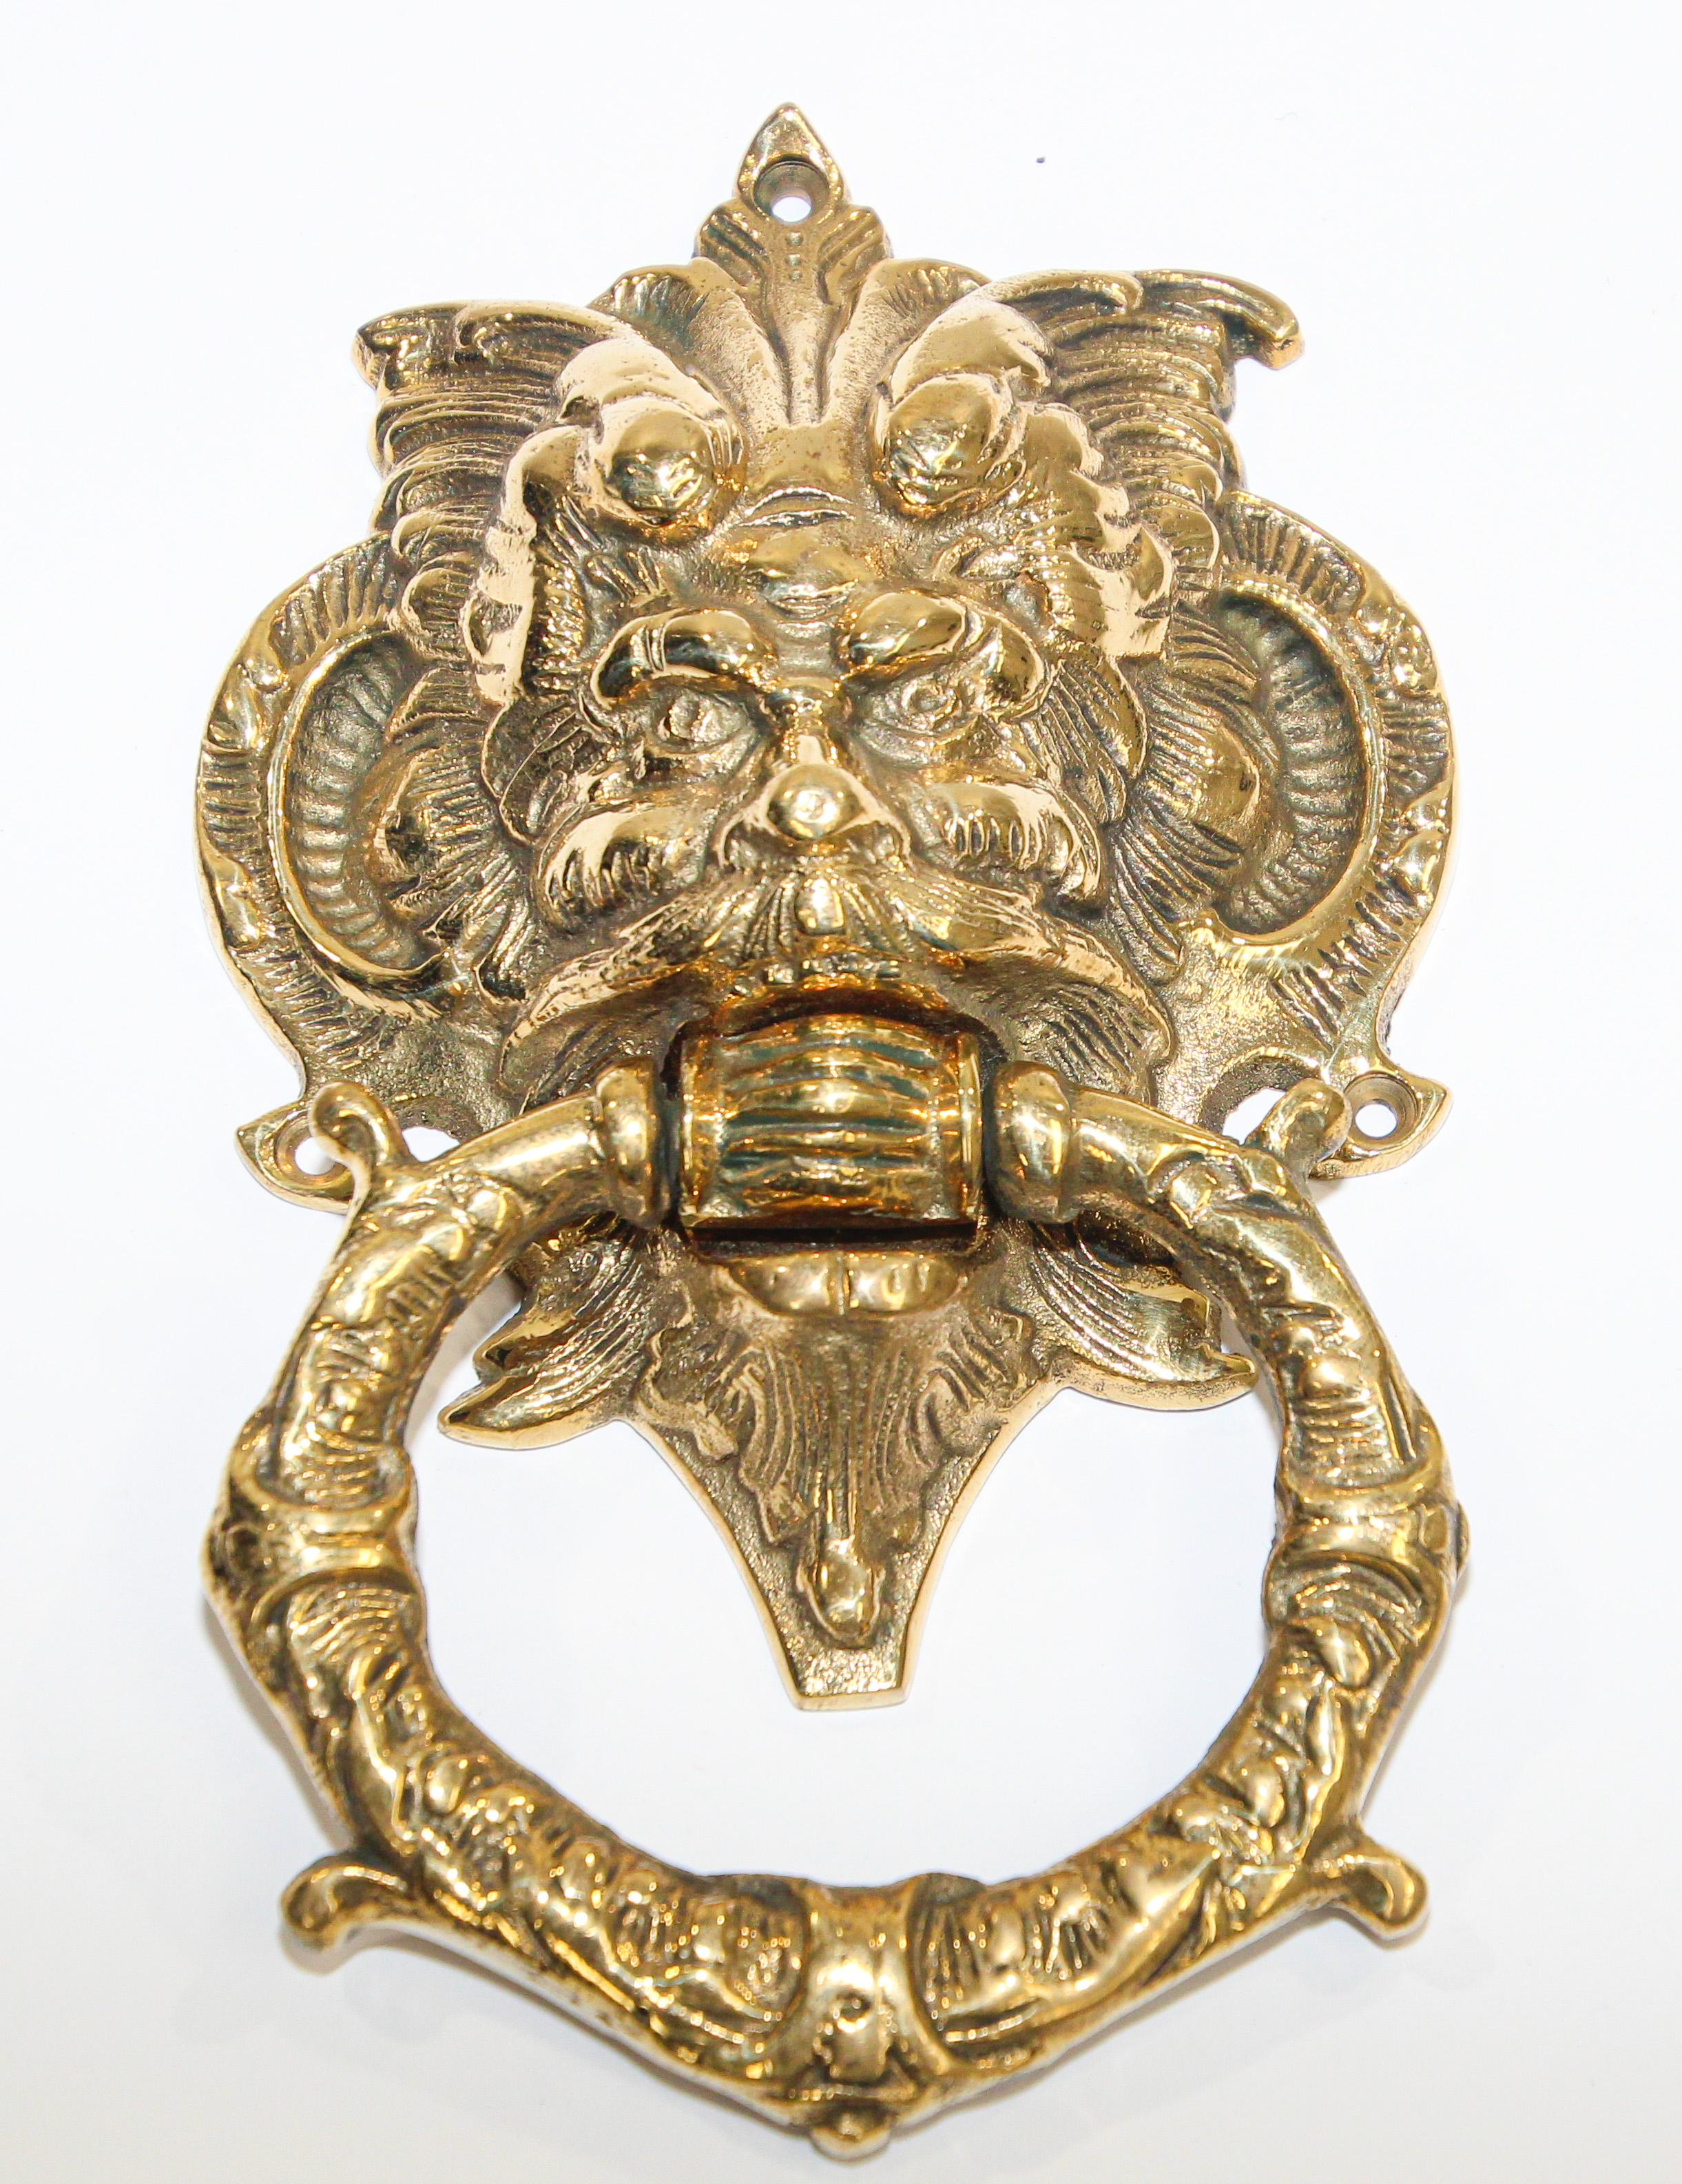 Vintage solid cast brass Italian door knocker with scary evil devil man face.
The large mascaron crest has been crafted in grotesque style and is sometimes called a chimera. 
A mascaron is an architectural ornamentation, typically a face, that is